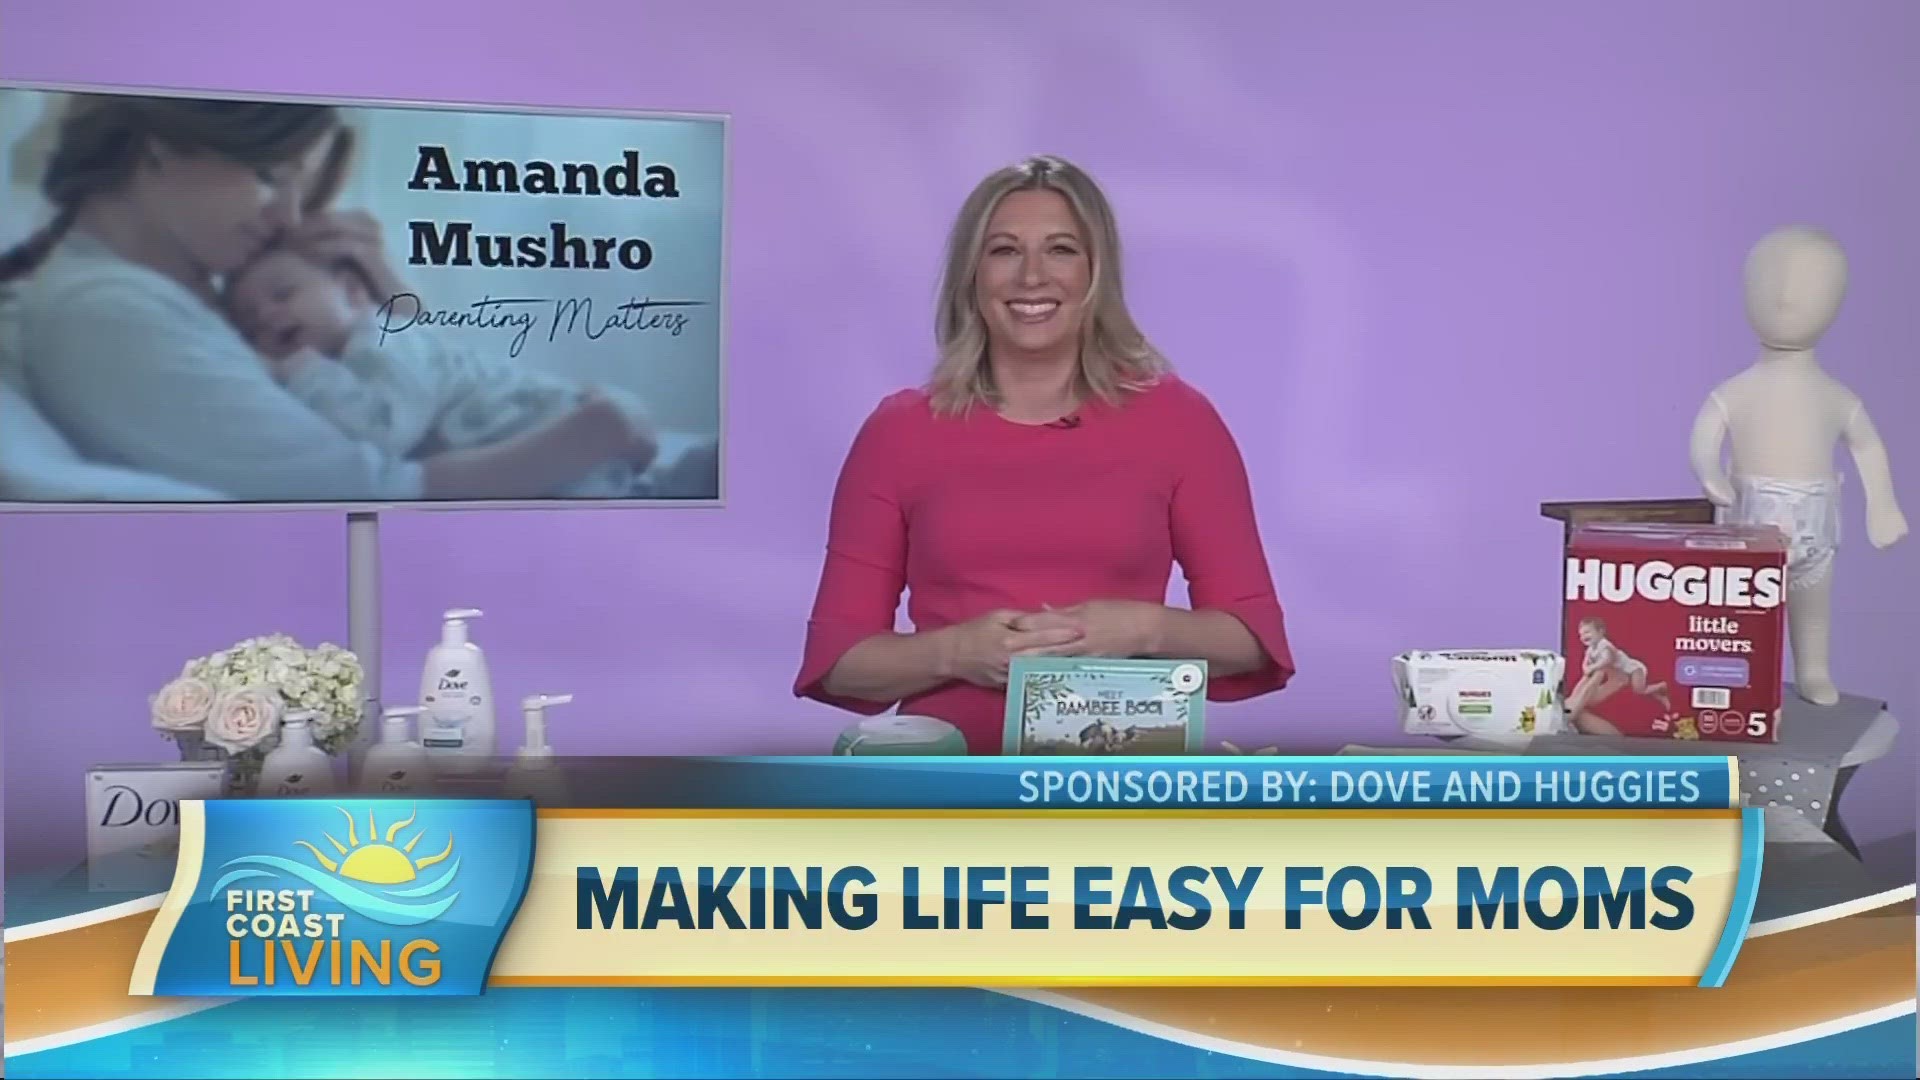 Nationally recognized parenting & lifestyle expert, Amanda Mushro offers solutions to make life easier for moms.